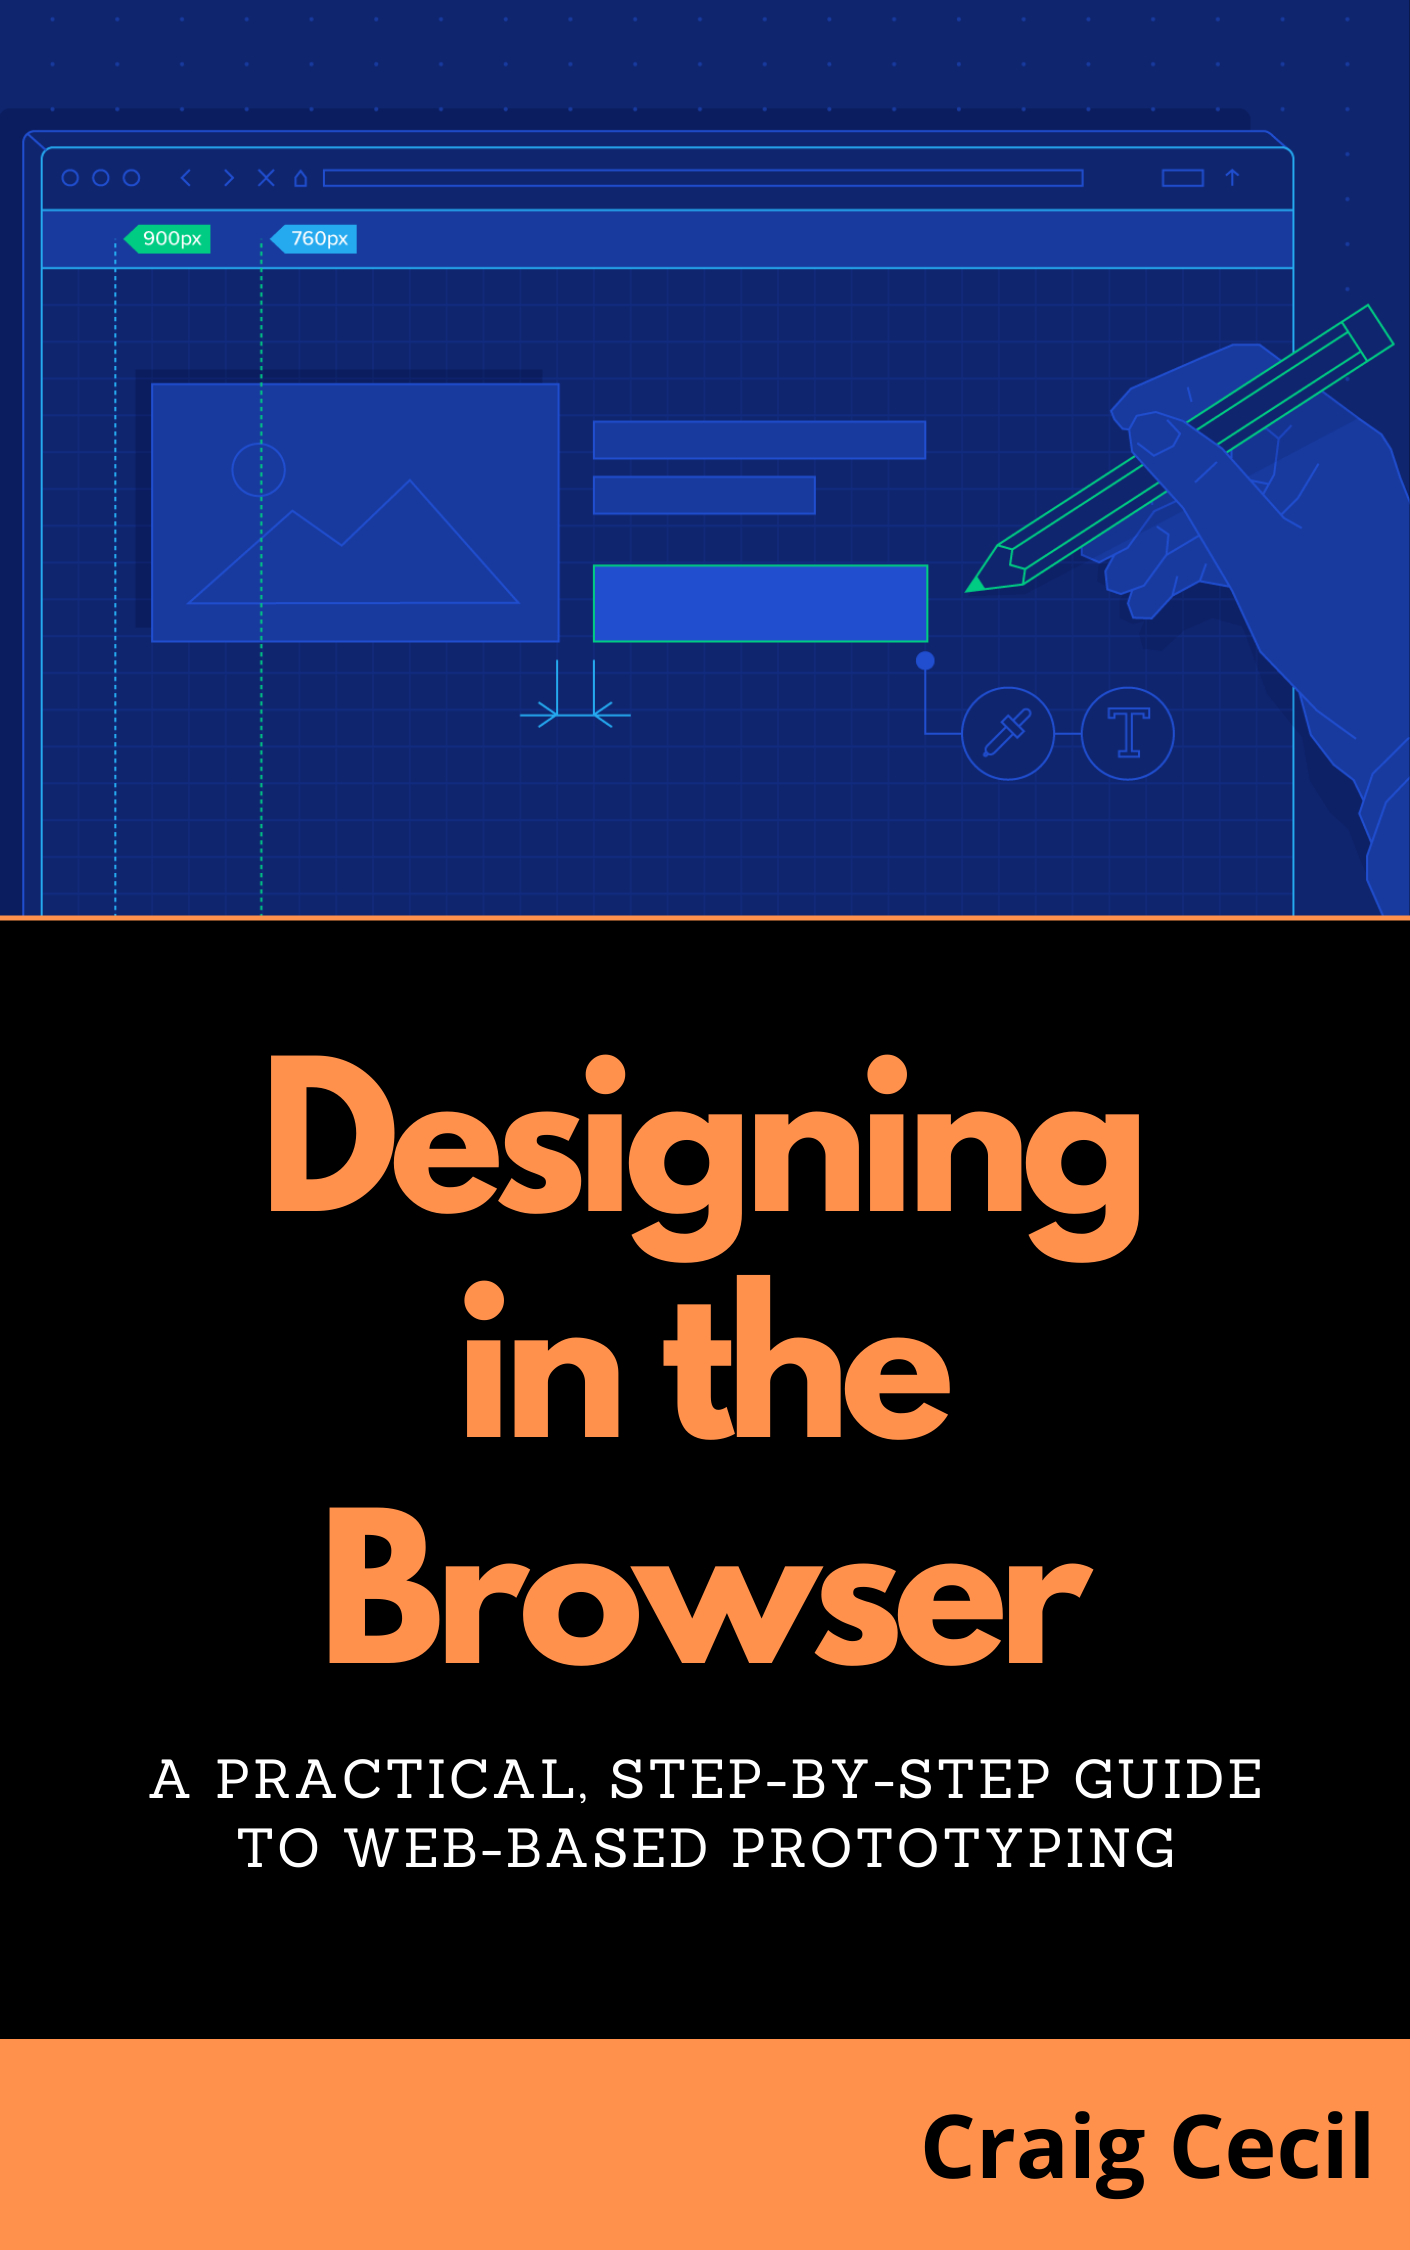 Designing in the Browser